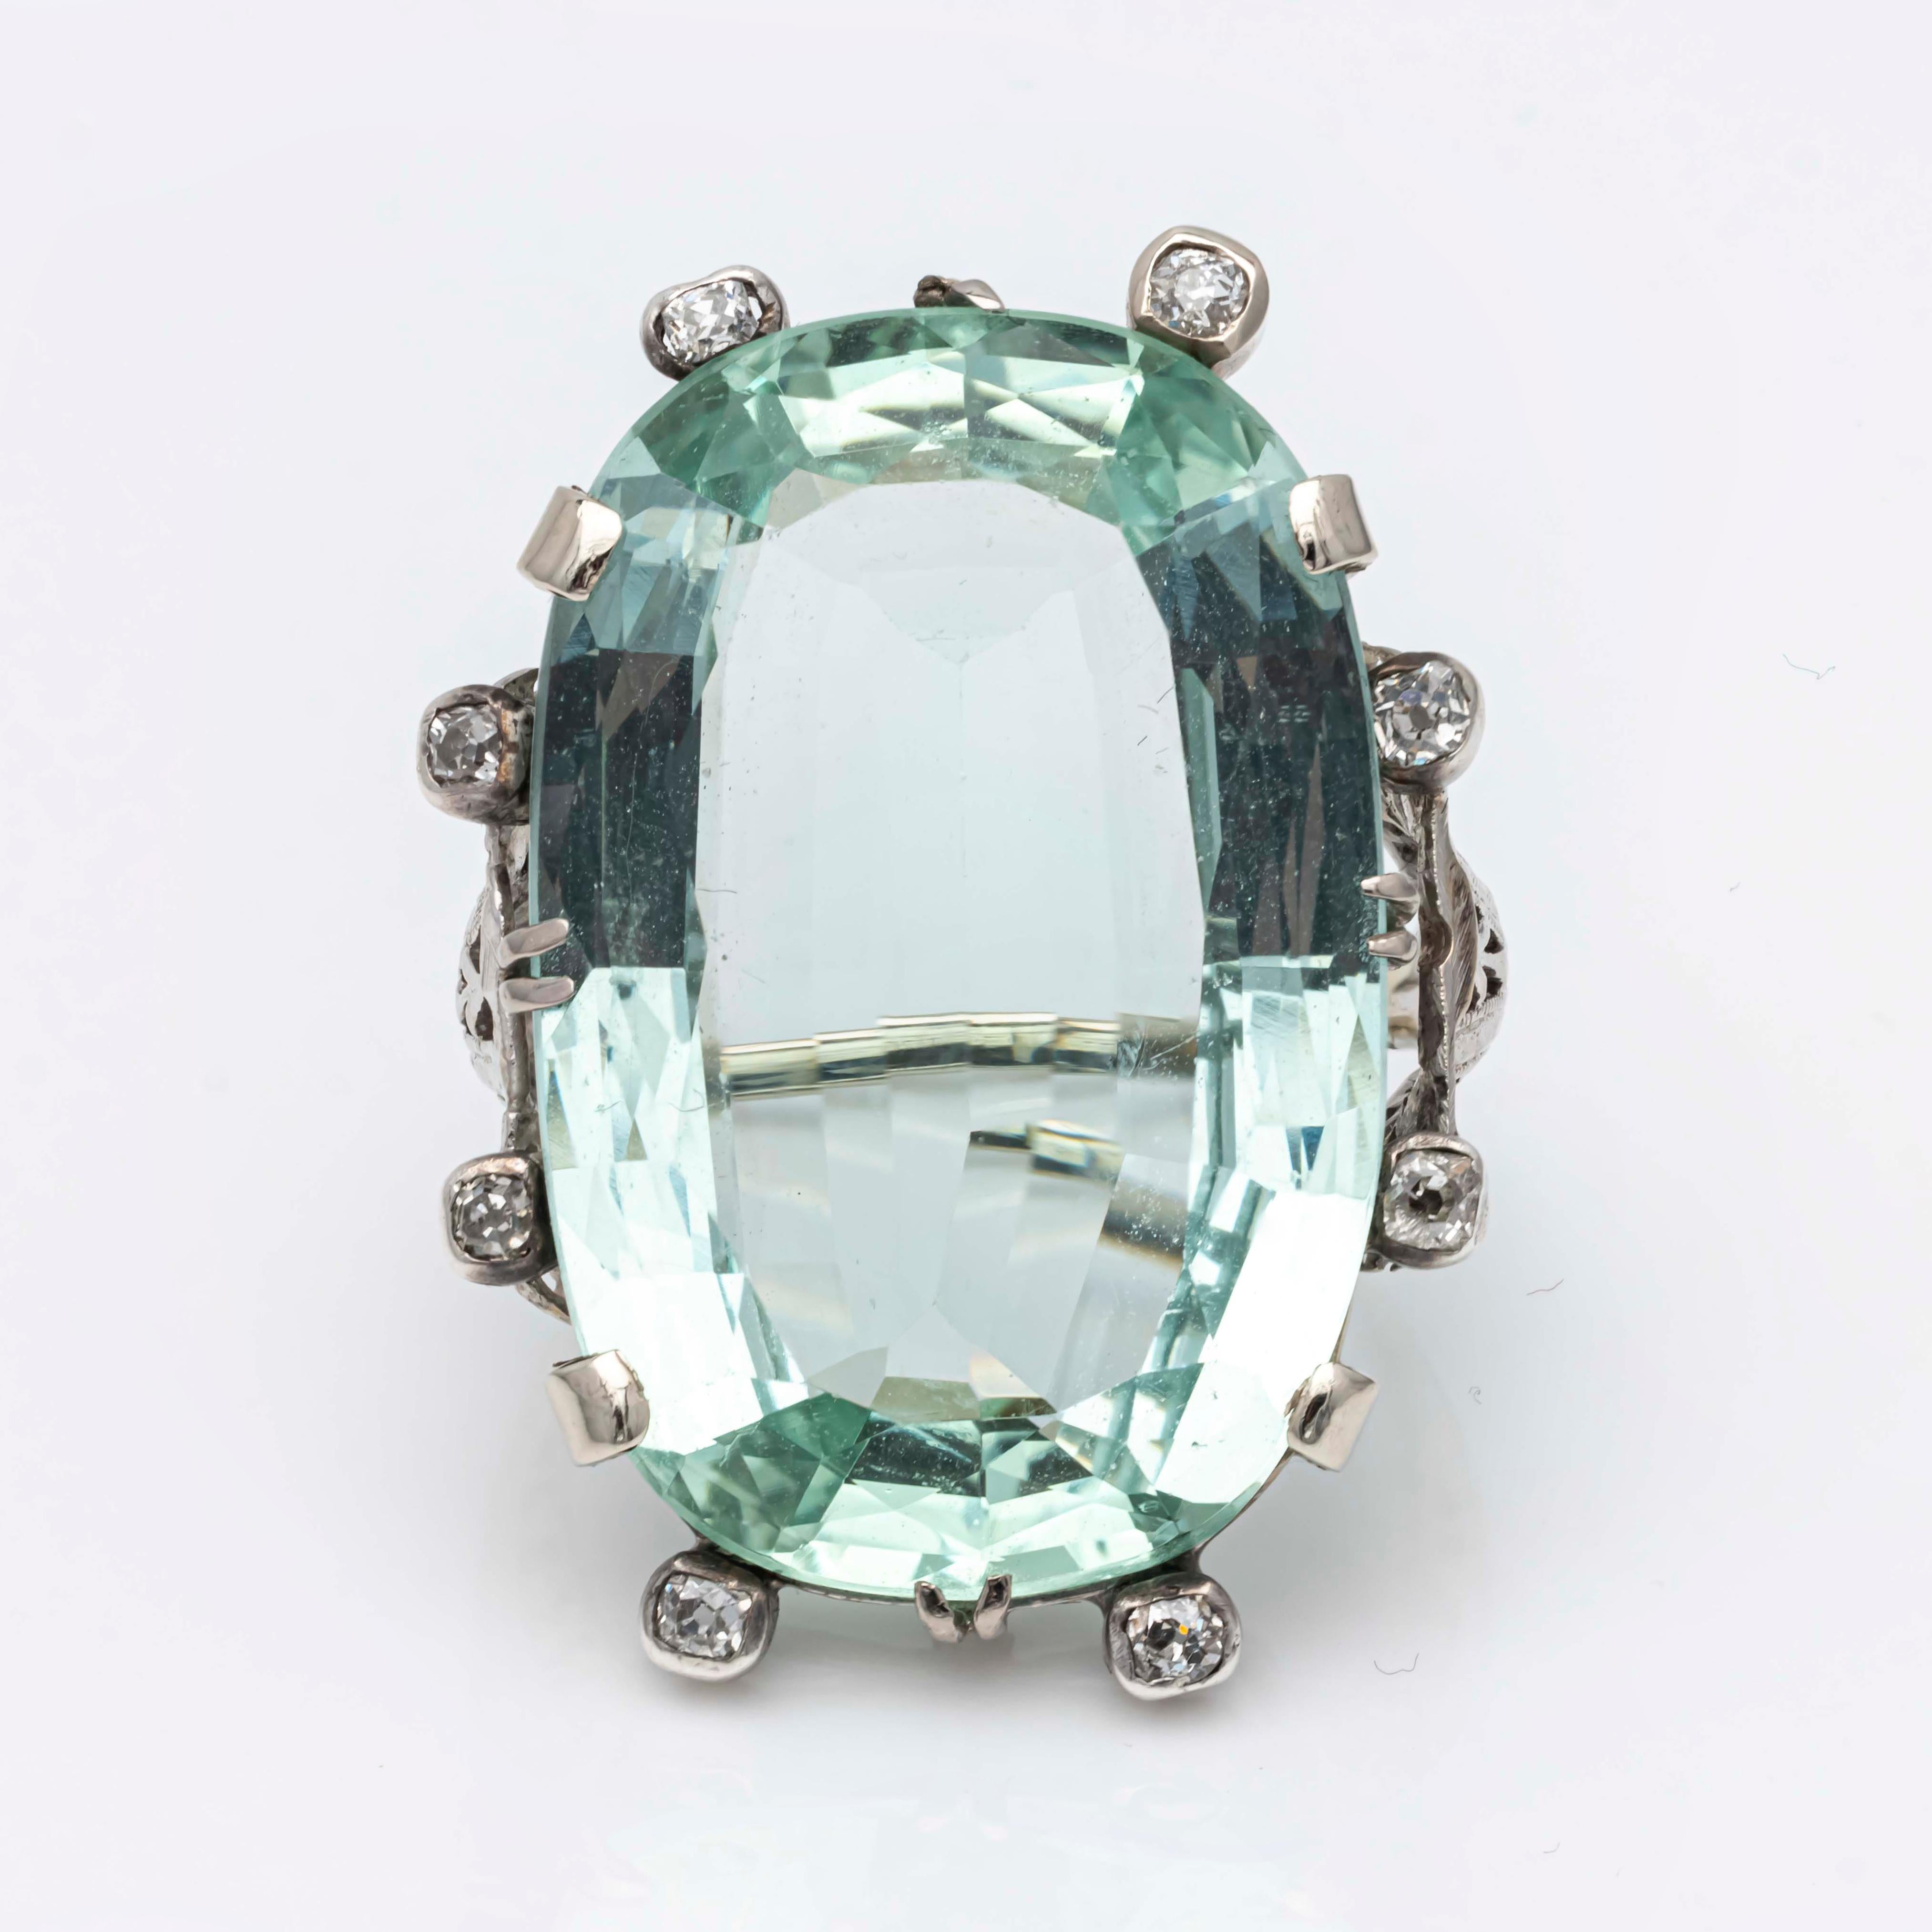 A beautiful cocktail ring that features a large, natural green aquamarine stone weighing 34.18 carats set in an intricate antique ring design. Accented by 8 old mine cut diamonds weighing 0.42 carats total. Finely made in 18K white gold. Size 7.5